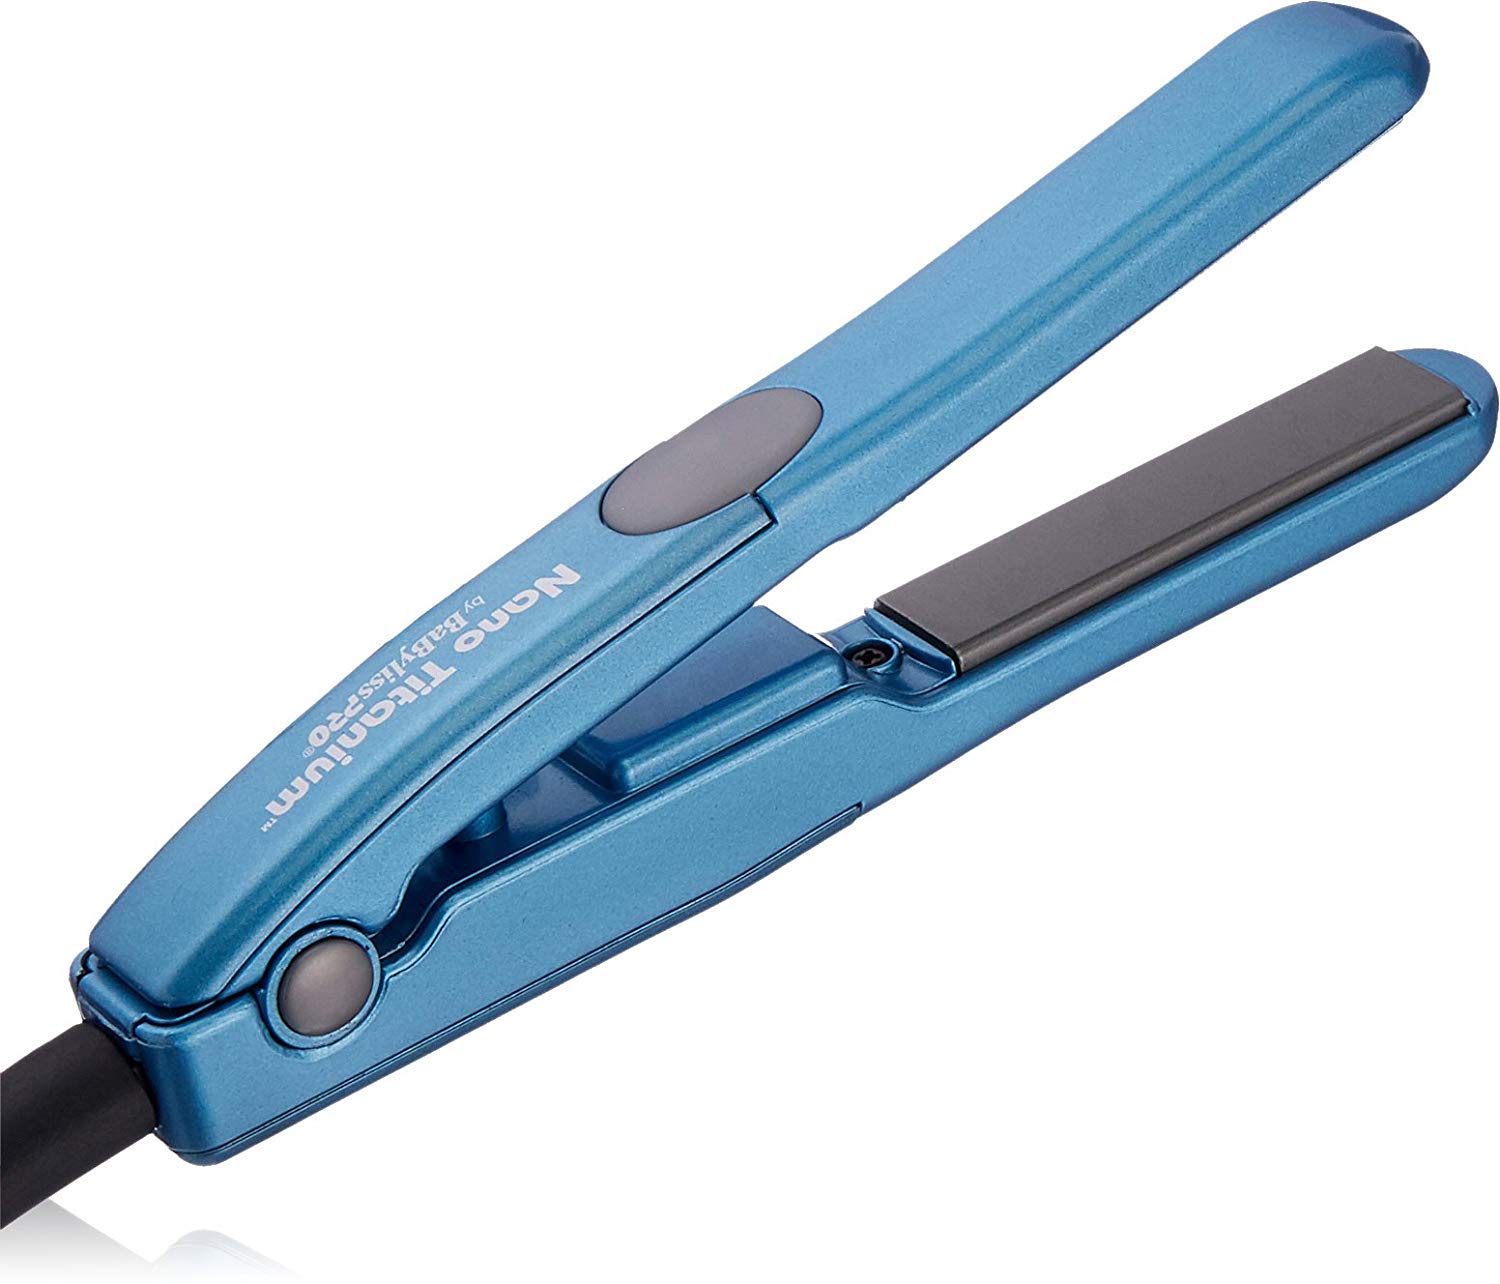 BabylissPRO Nano Titanium Mini Hair Straightener, Compact Professional Flat Iron for Styling On The Go